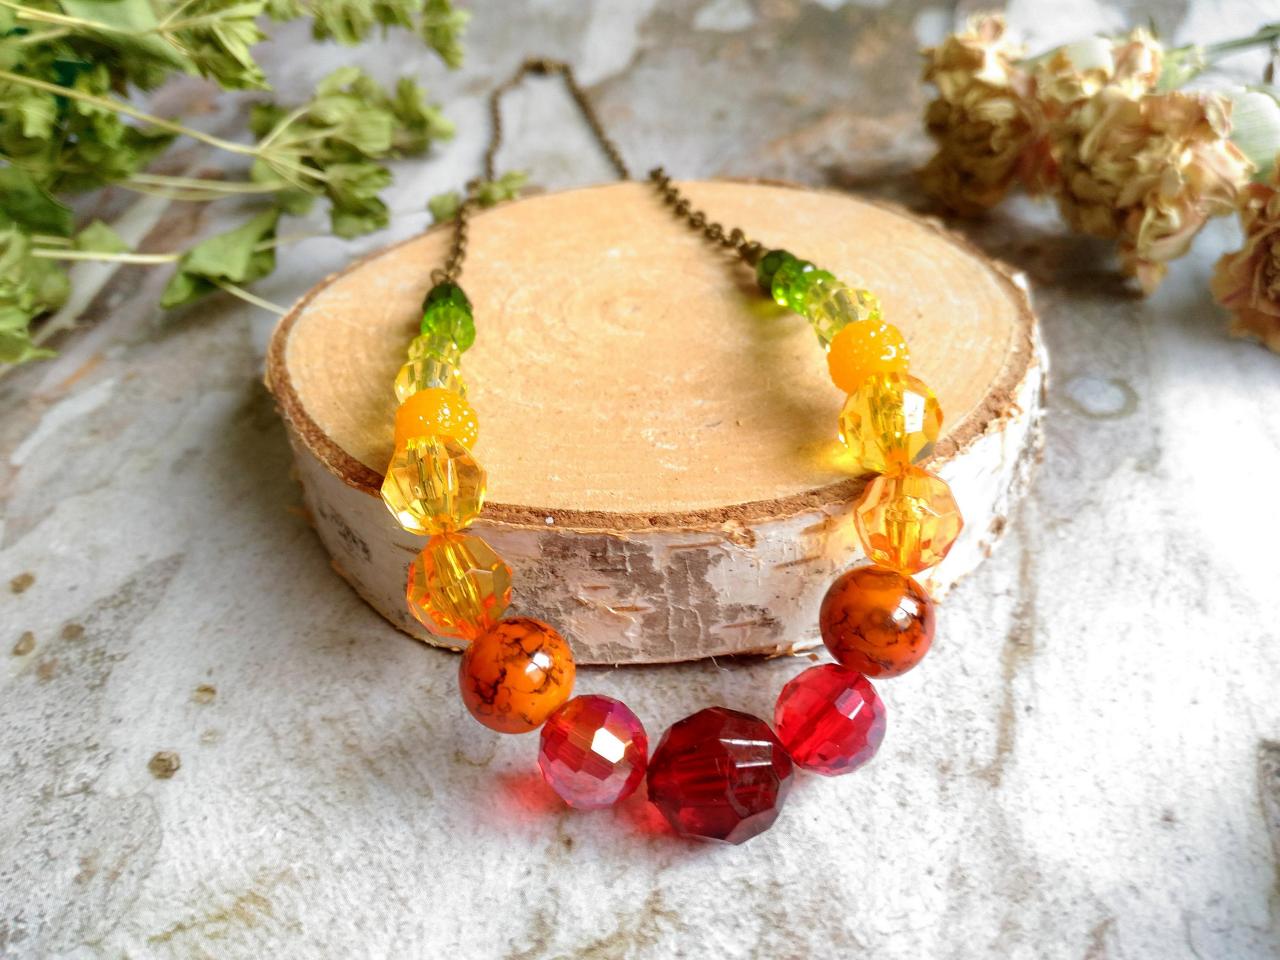 Autumn Beaded Necklace, Green Yellow Orange Red Ombre Necklace, Bronze Chain Beaded Necklace, Seasonal Boho Necklace, Gift For Her